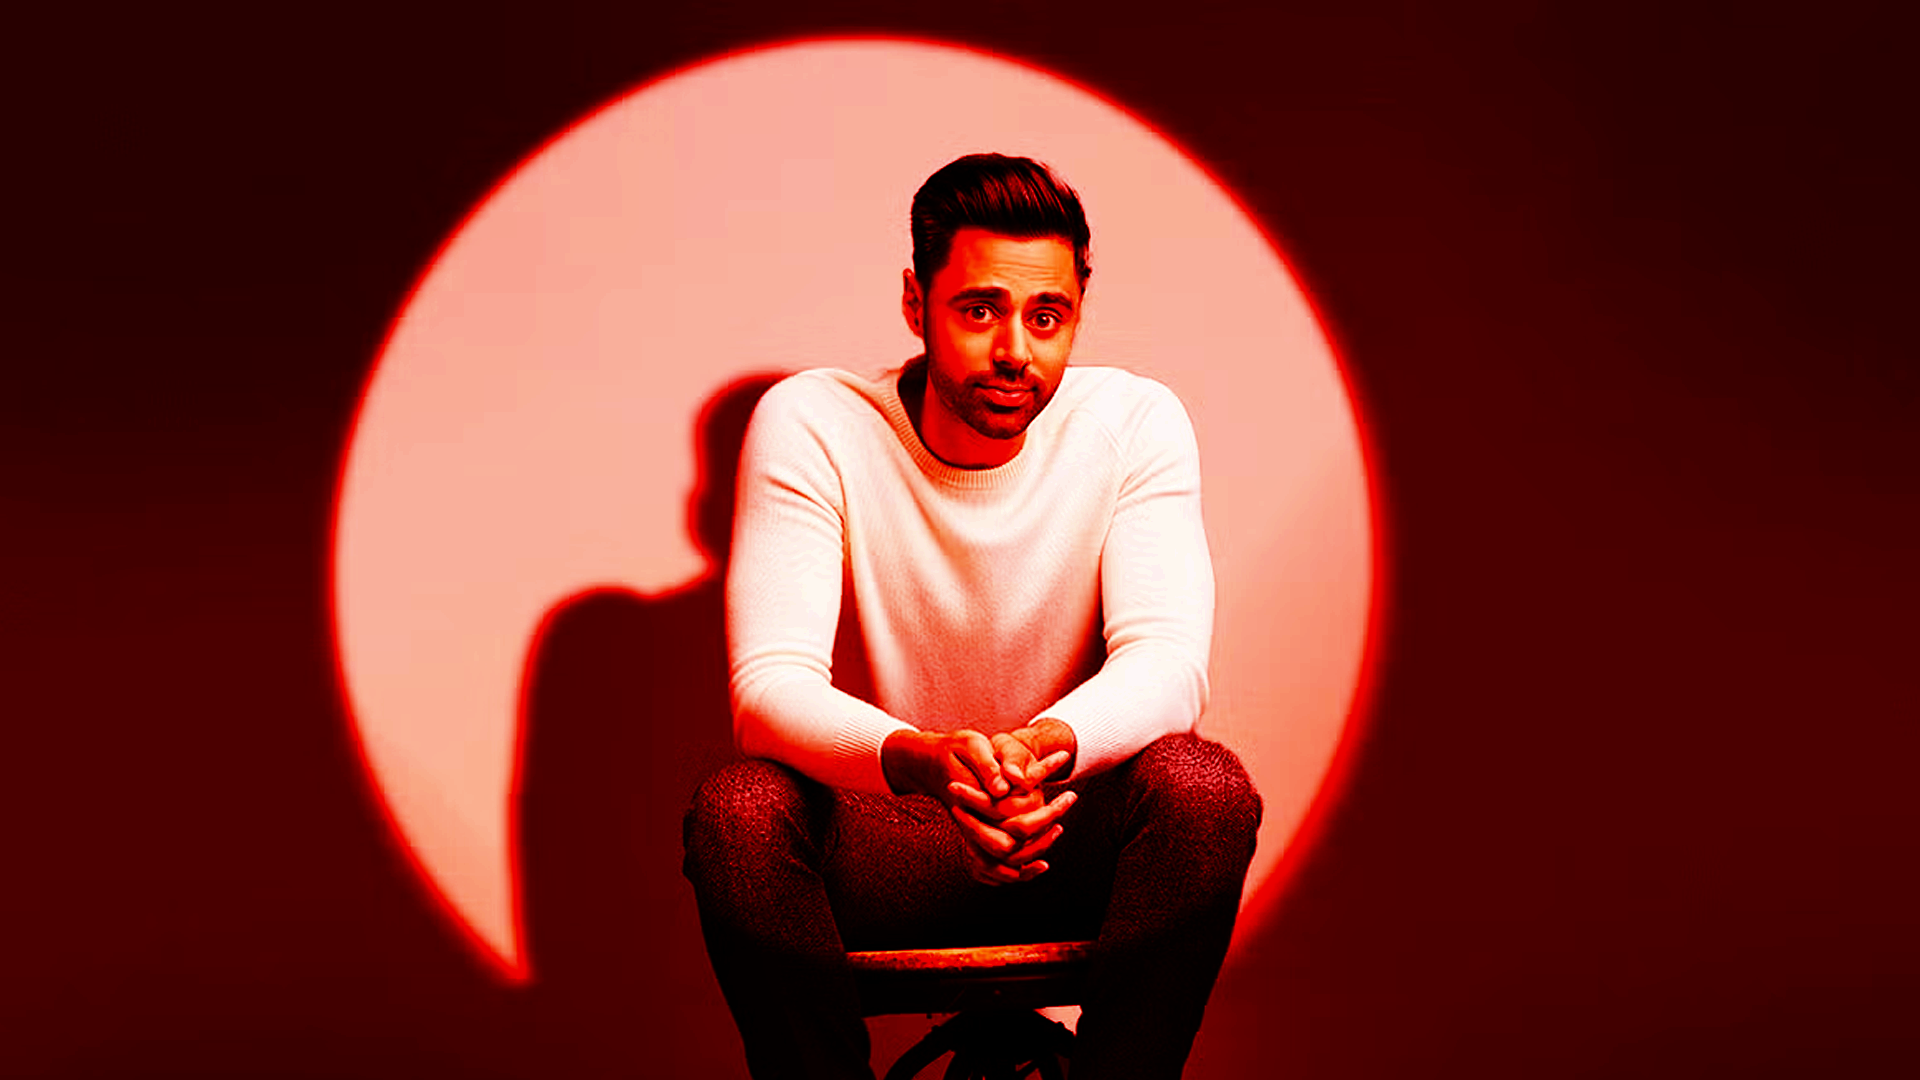 Hasan Minhaj sits in front of a bright red circular light